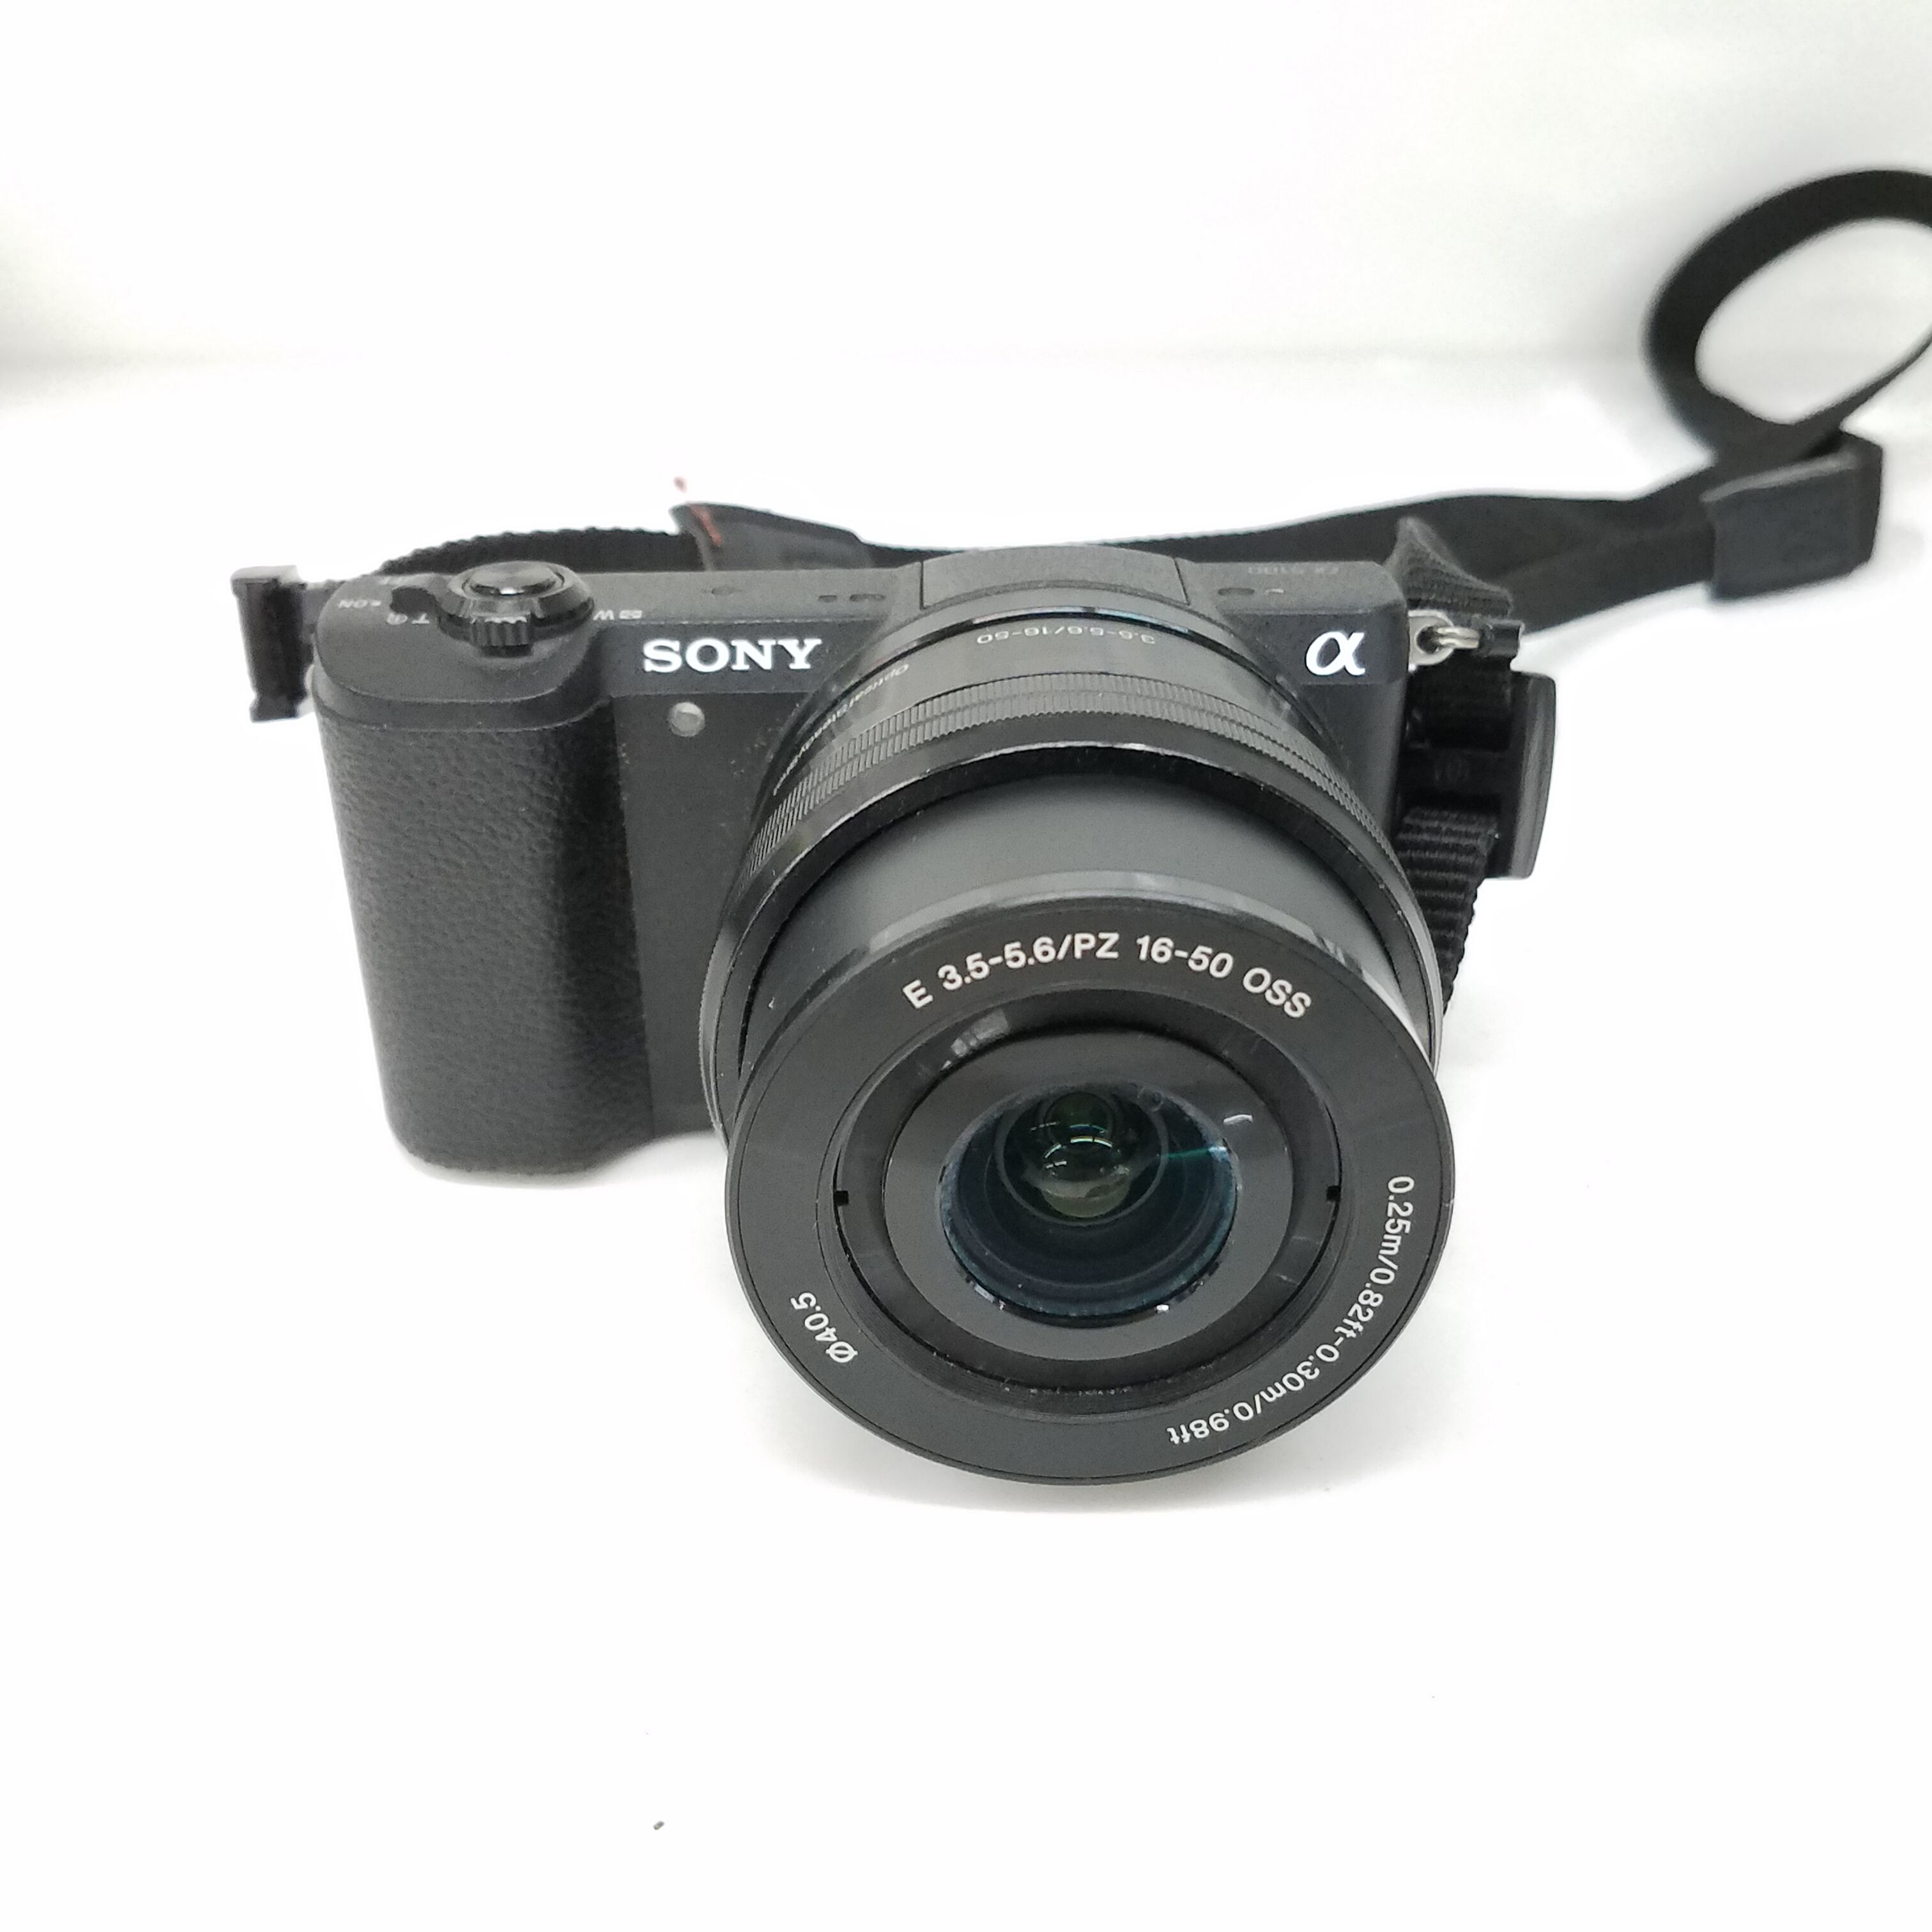 Buy the Sony Alpha A5100 24.3MP Digital Camera with 16-50mm Lens